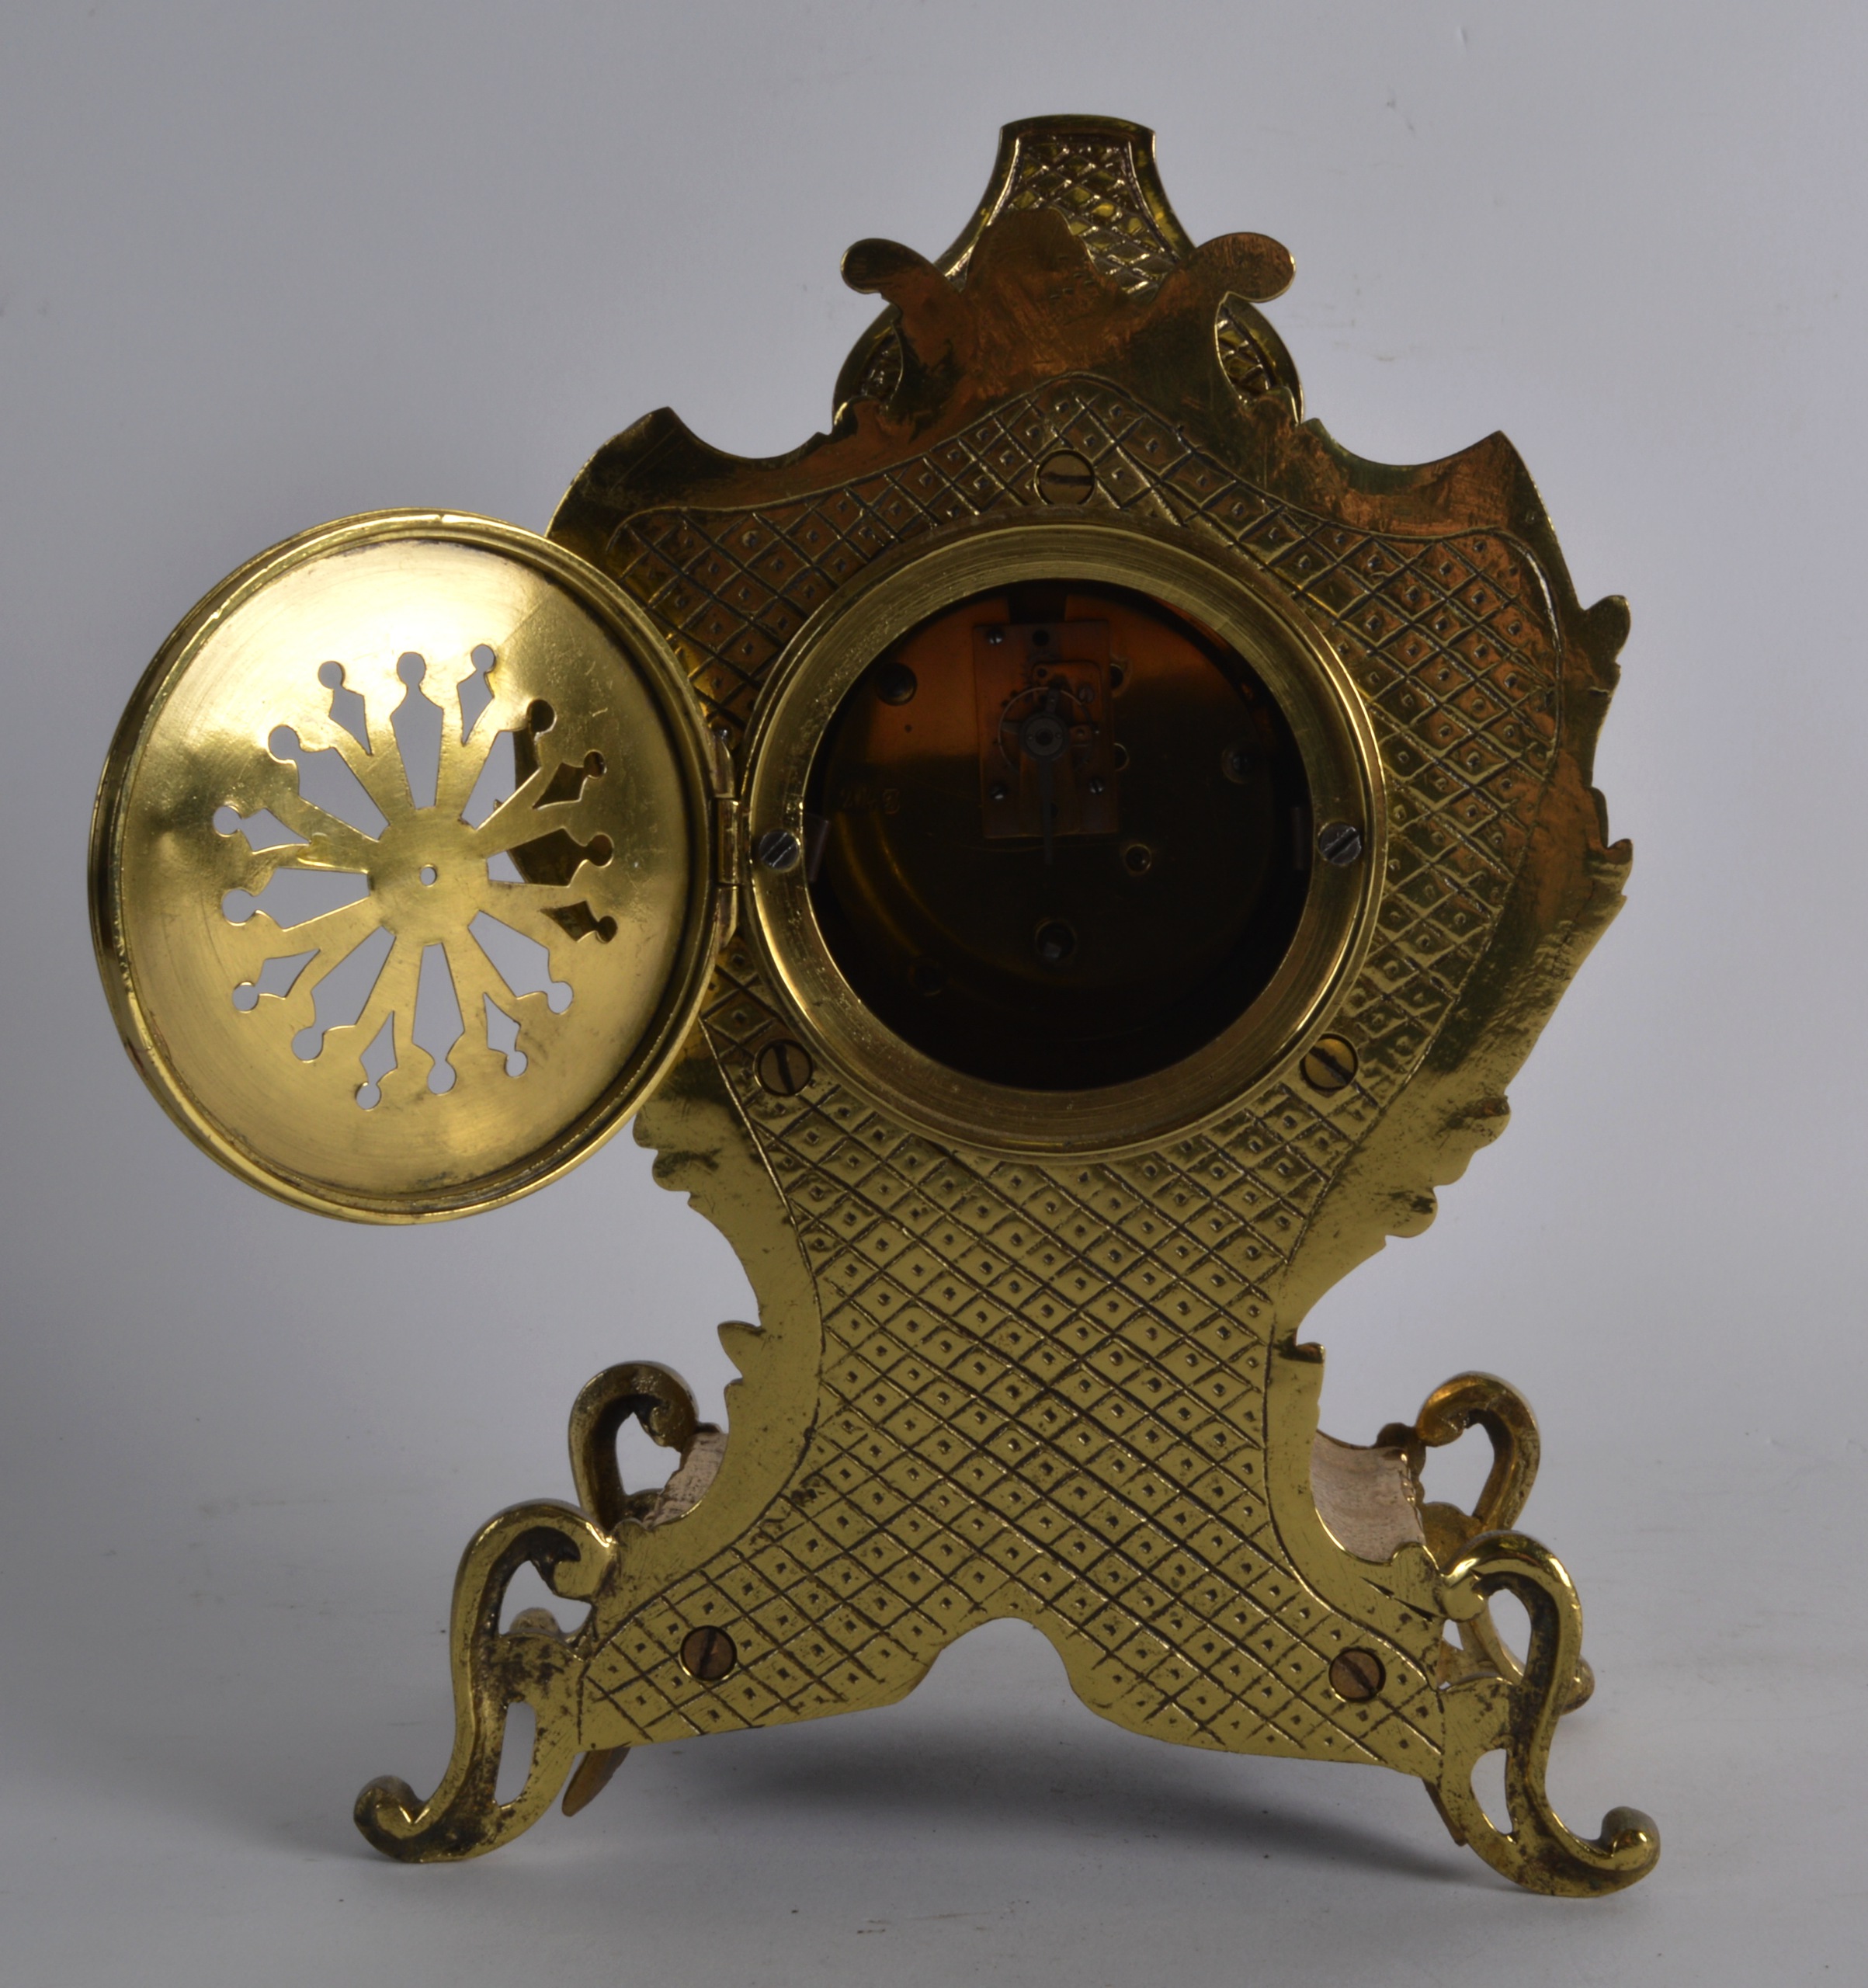 AN EARLY 20TH CENTURY FRENCH BRASS AND CHAMPLEVE ENAMEL MANTEL CLOCK with floral painted dial and - Image 2 of 2